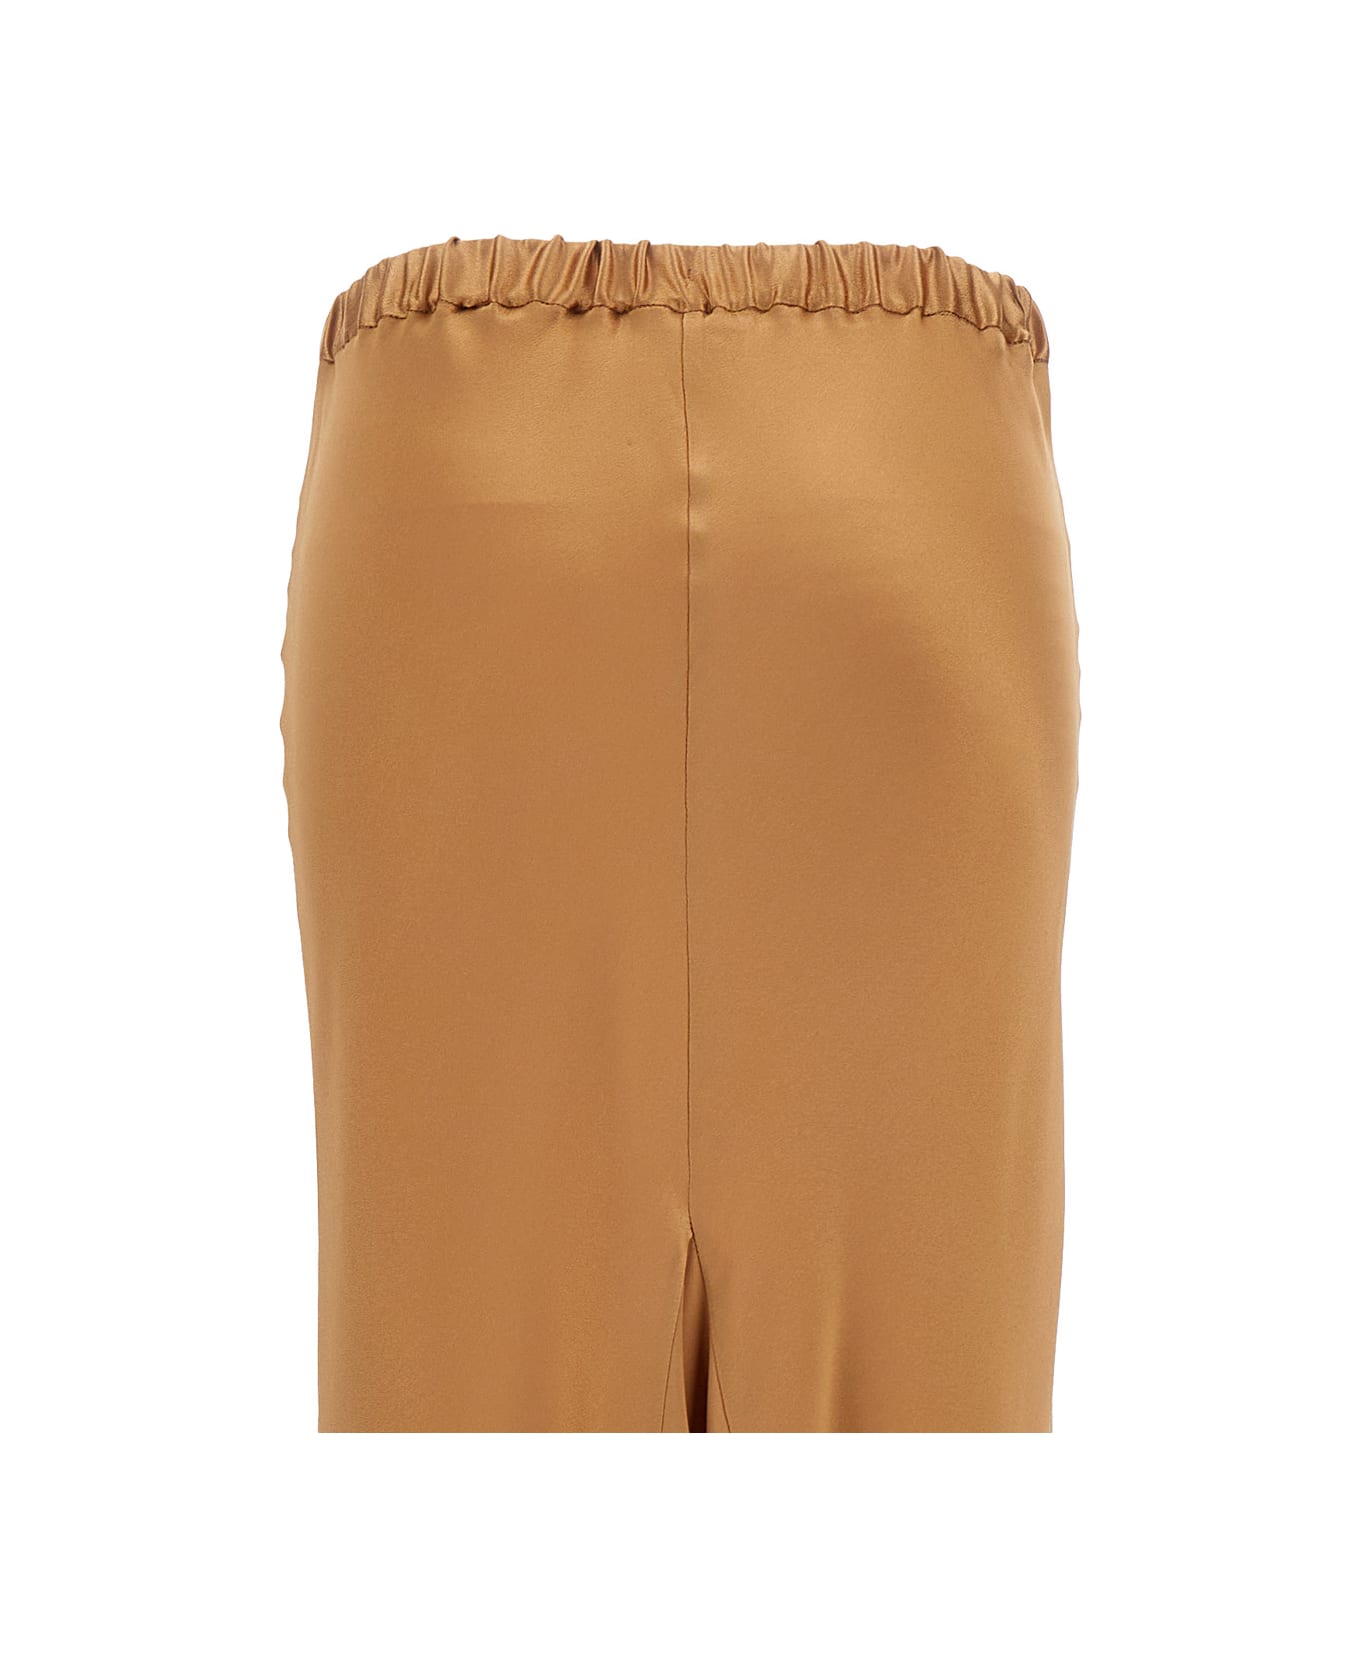 Antonelli Maxi Brown Skirt With Split At The Back In Acetate Blend Woman - Brown